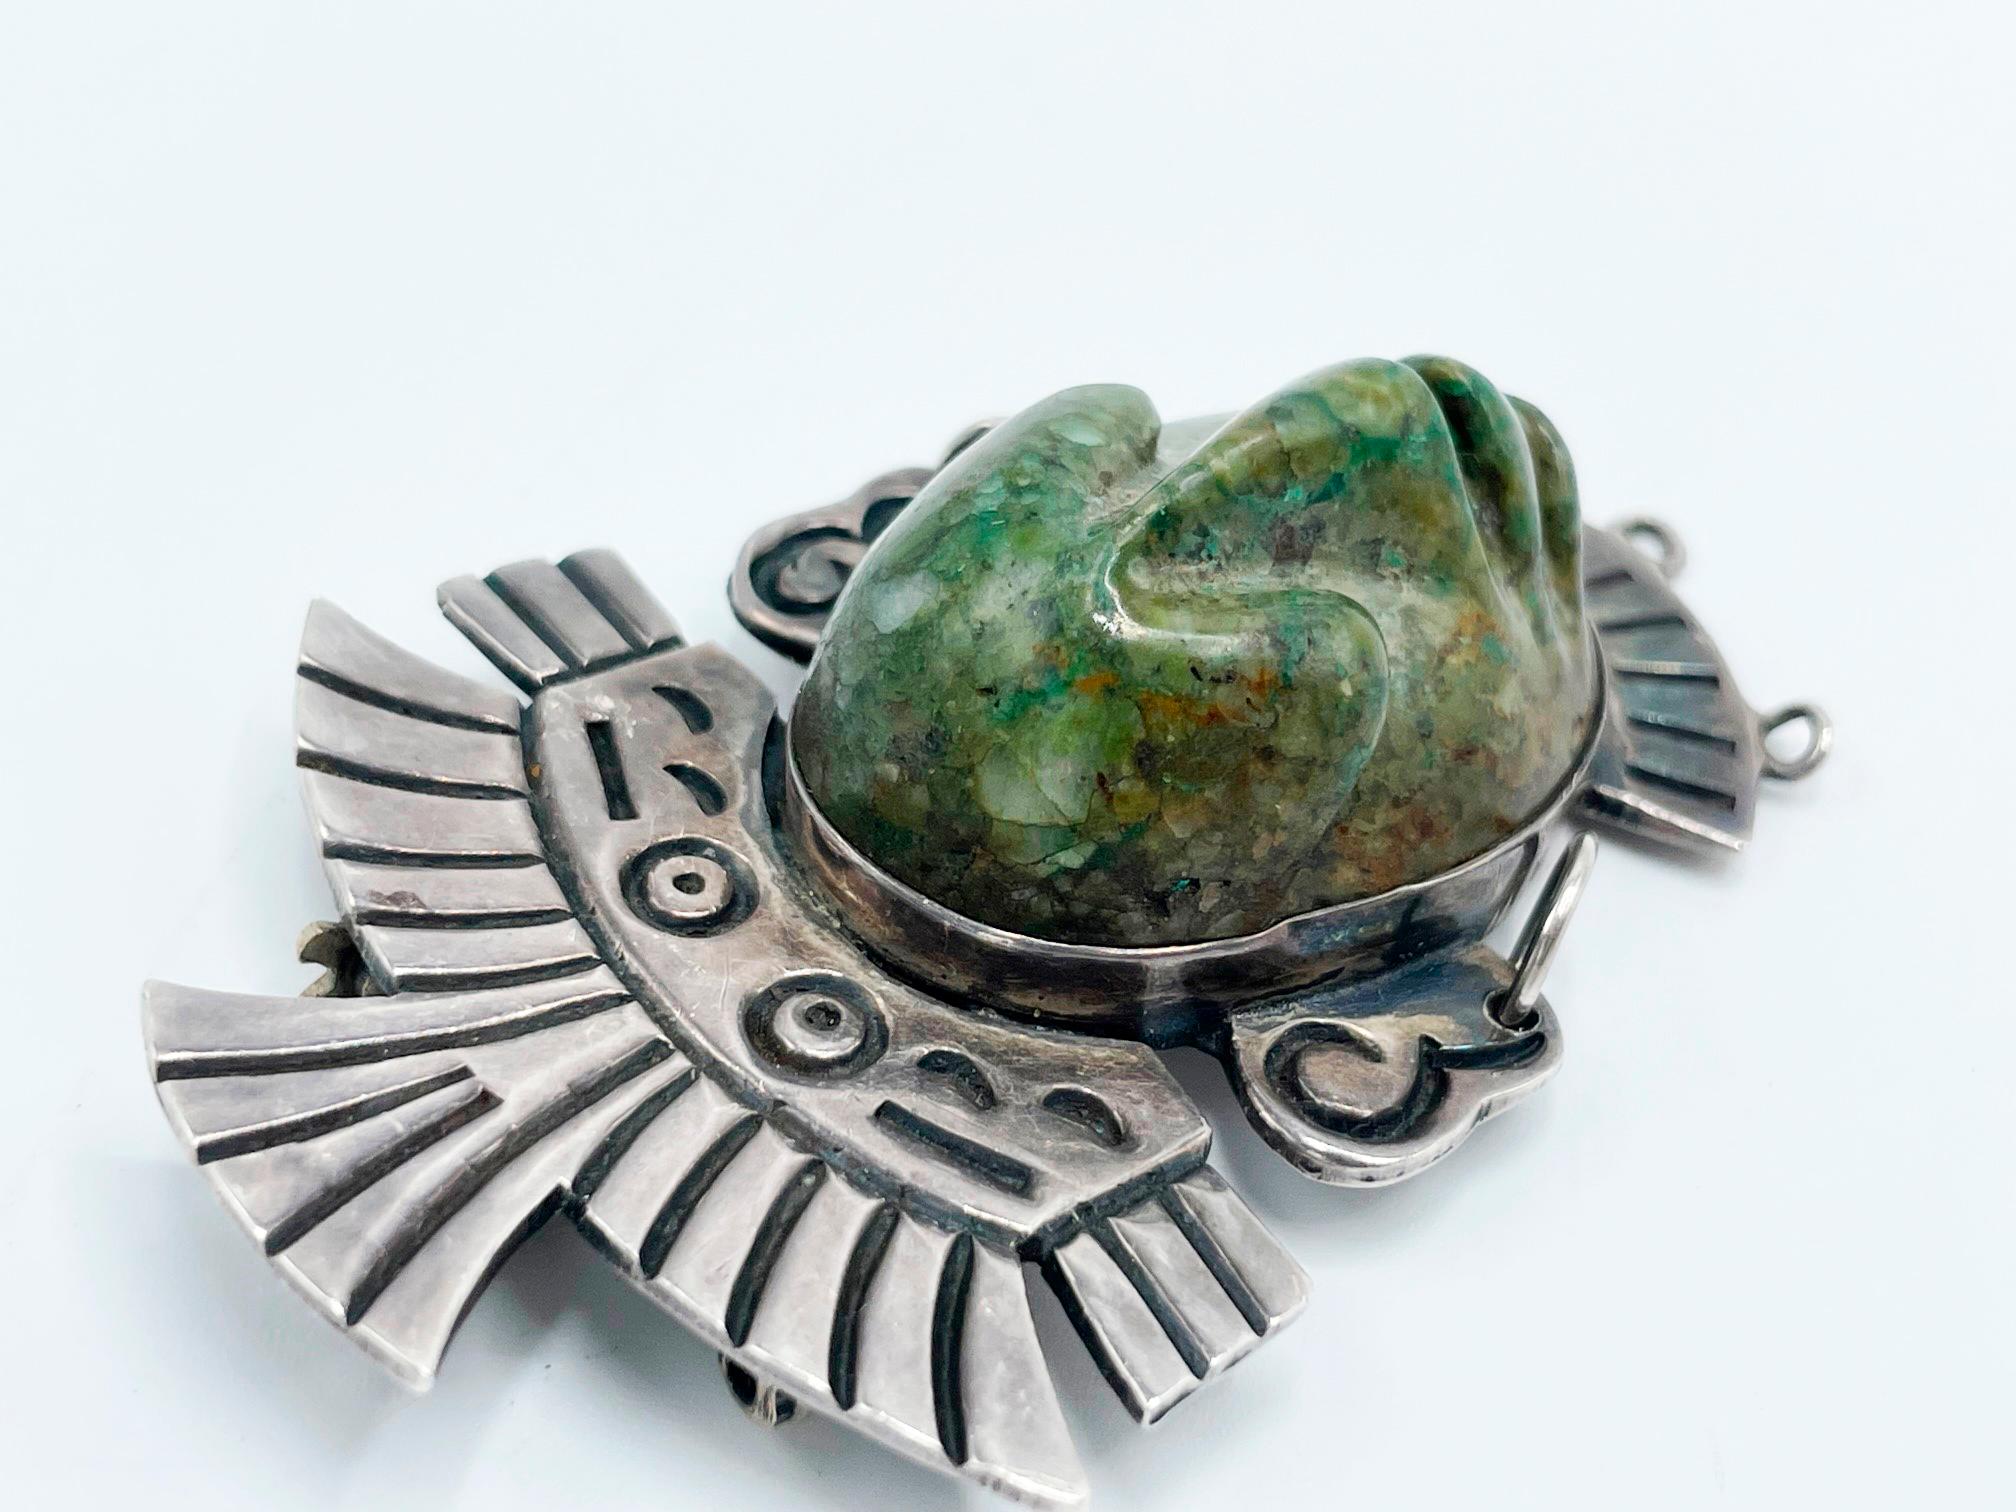 Los Ballesteros 925 Sterling Silver Taxco Mexico Mayan Face Figural Brooch Pin
Sterling Silver 

Period:
1940-1949
Date of Manufacture:
Circa 1945
Dimensions: 
6,5 centimeters long
5,5 centimeters depth

This is an early, rare, and important Los